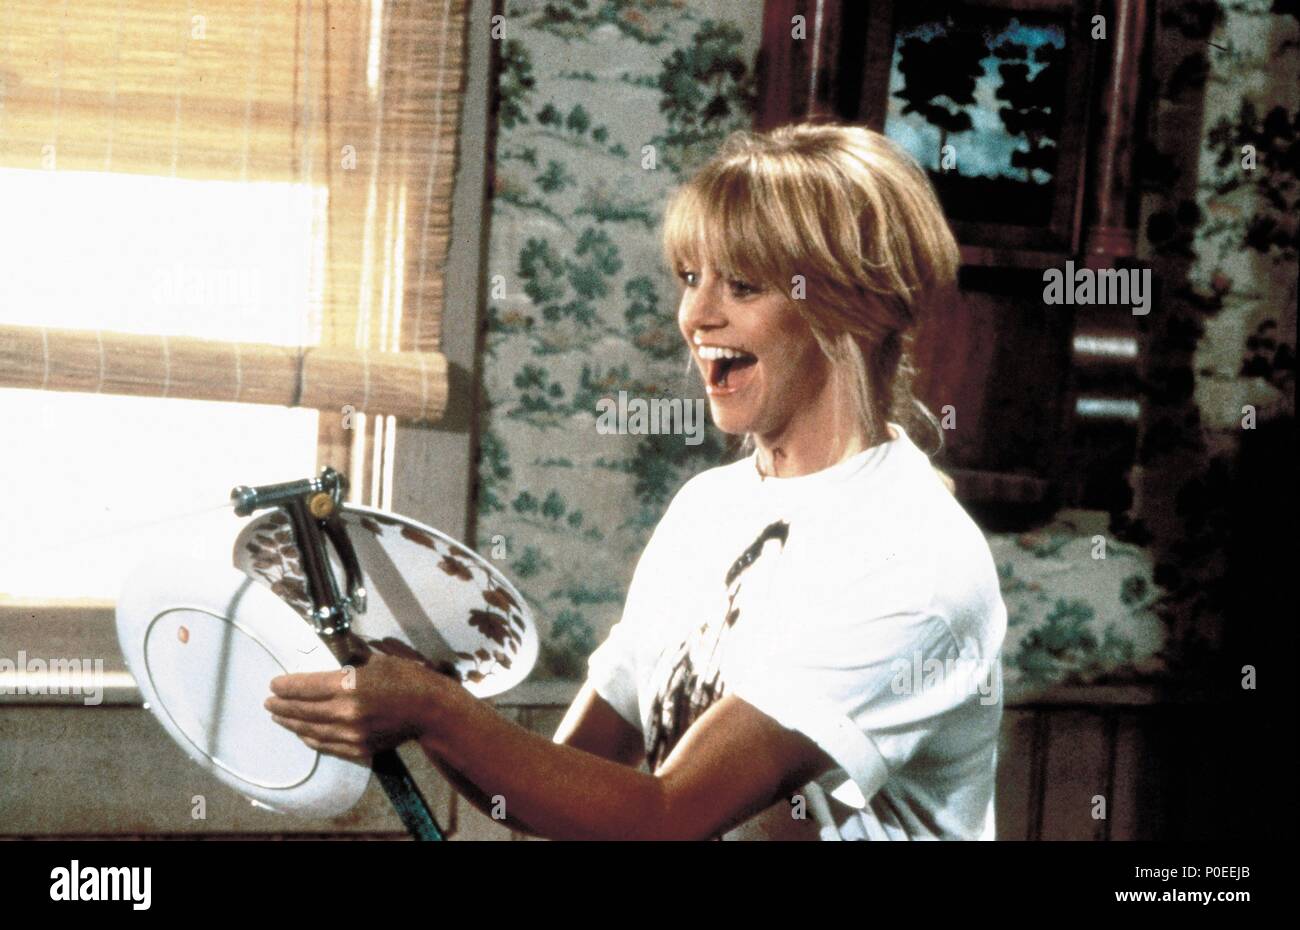 Original Film Title: OVERBOARD.  English Title: OVERBOARD.  Film Director: GARRY MARSHALL.  Year: 1987.  Stars: GOLDIE HAWN. Credit: M.G.M. / Album Stock Photo